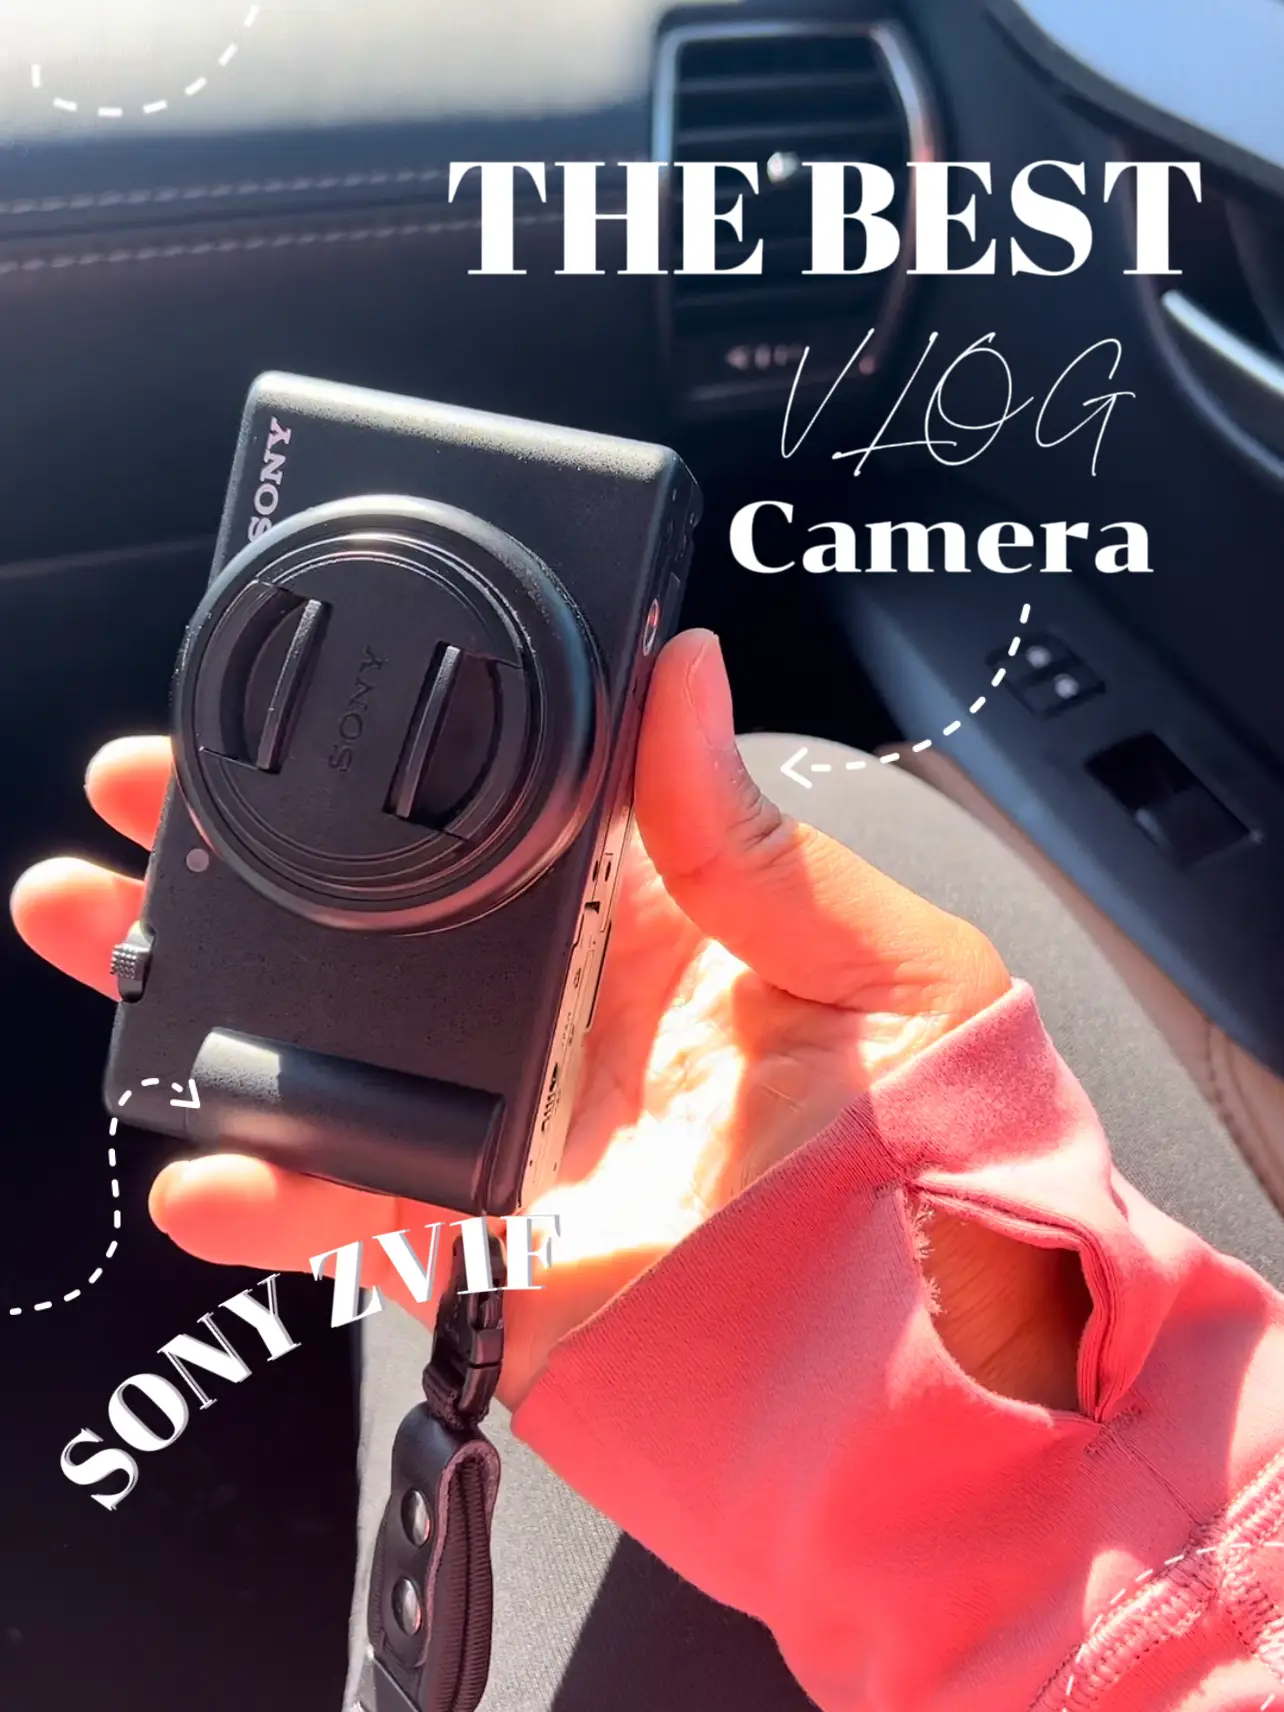 Sony's new vlogging camera makes me want to ditch my iPhone for